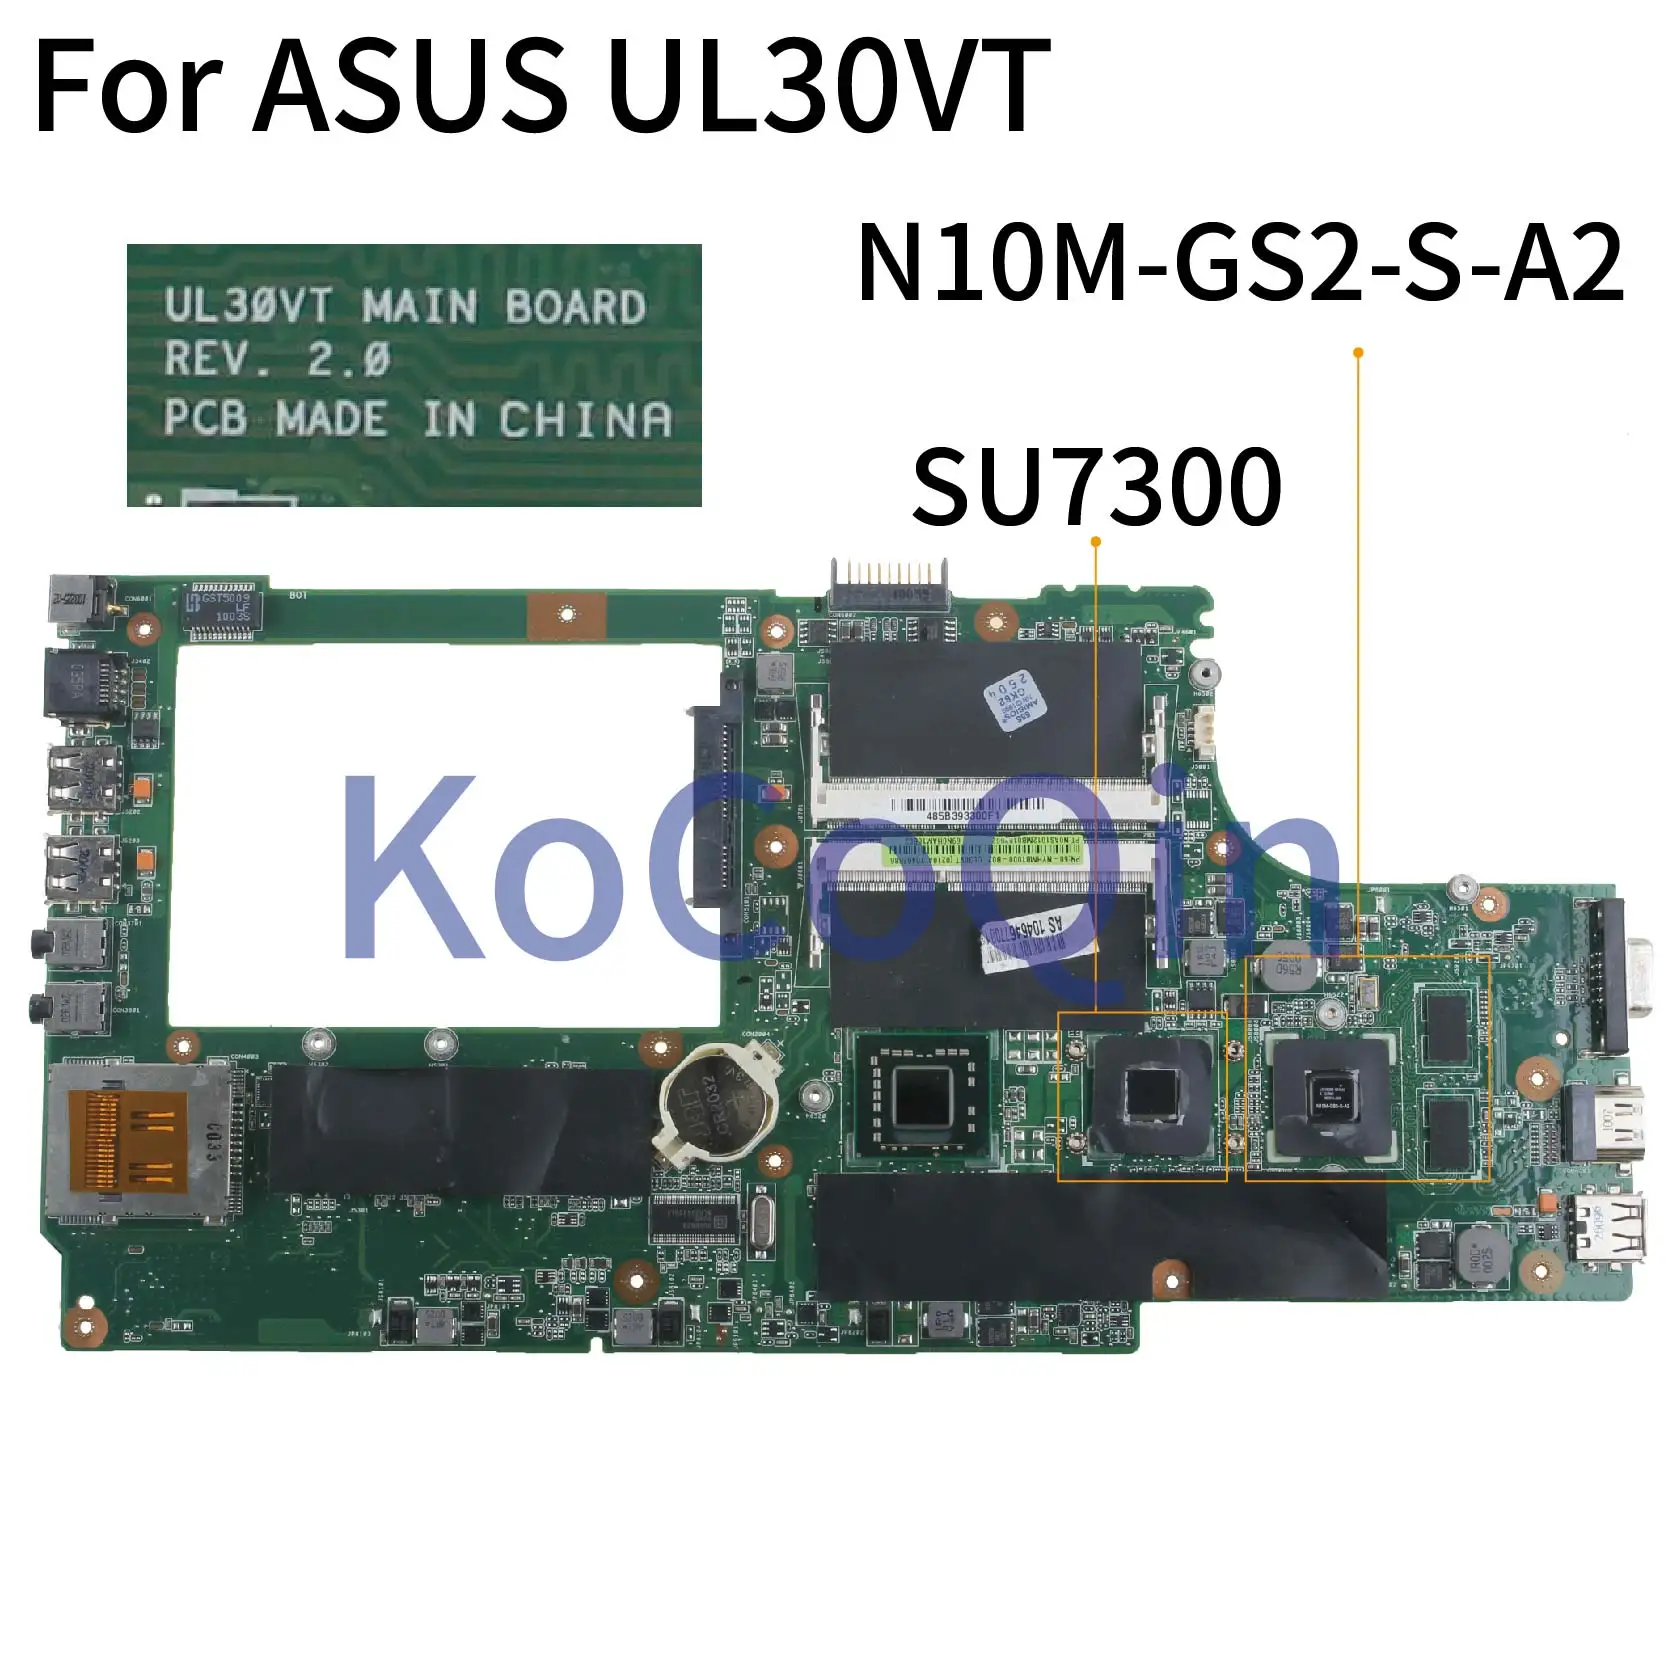 

KoCoQin Laptop motherboard For ASUS UL30VT SU7300 Mainboard REV.2.0 N10M-GS2-S-A2